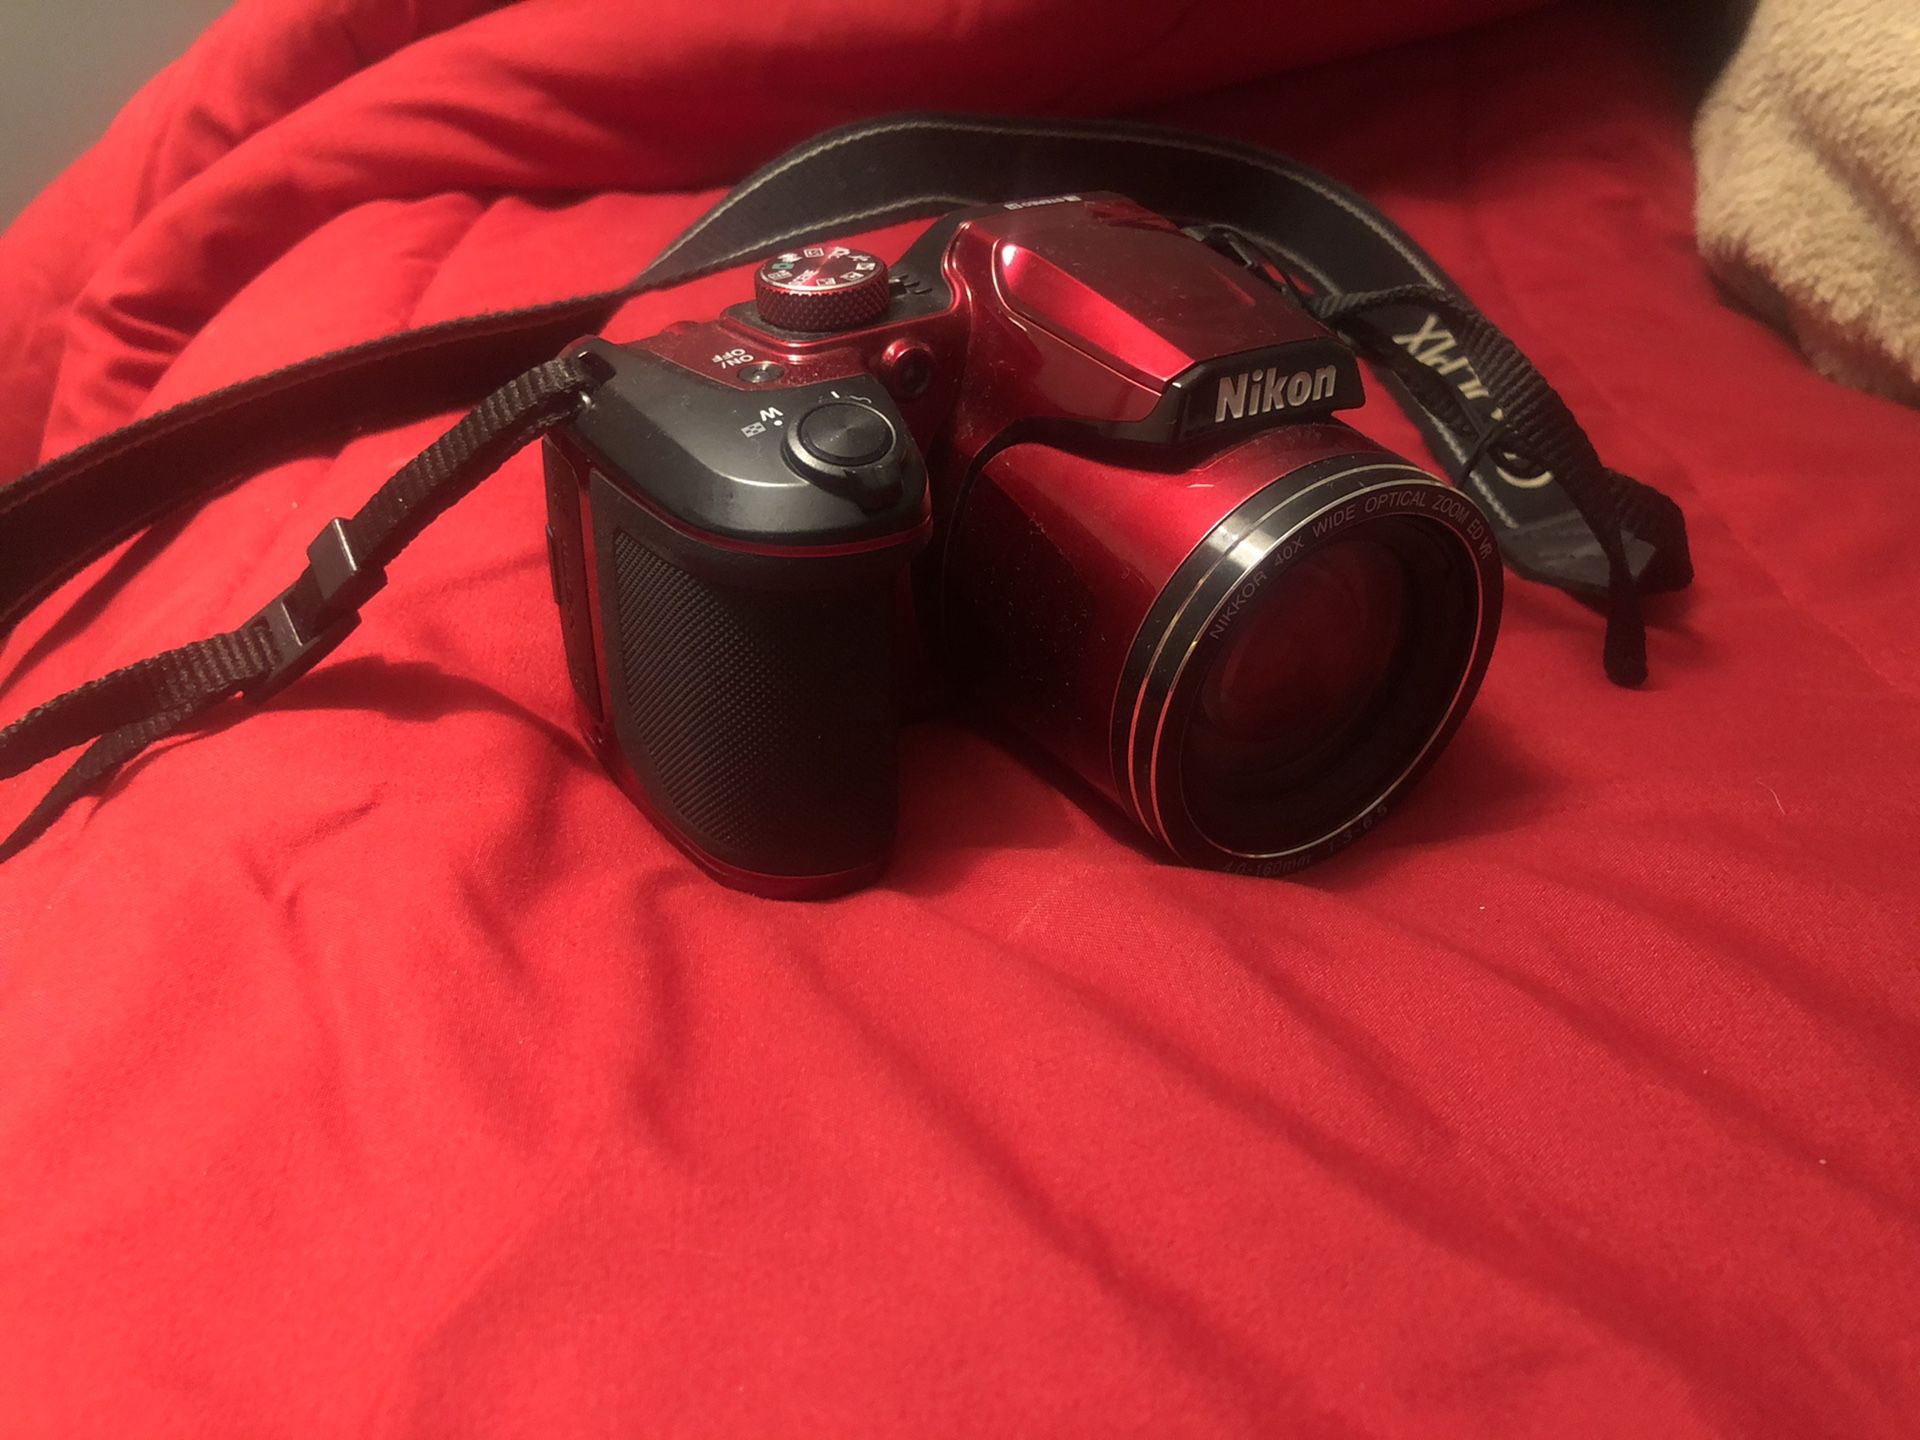 I’m selling a Nikon COOLPIX B500 16MP Digital Camera with 40x Optical Zoom - message me for more information.